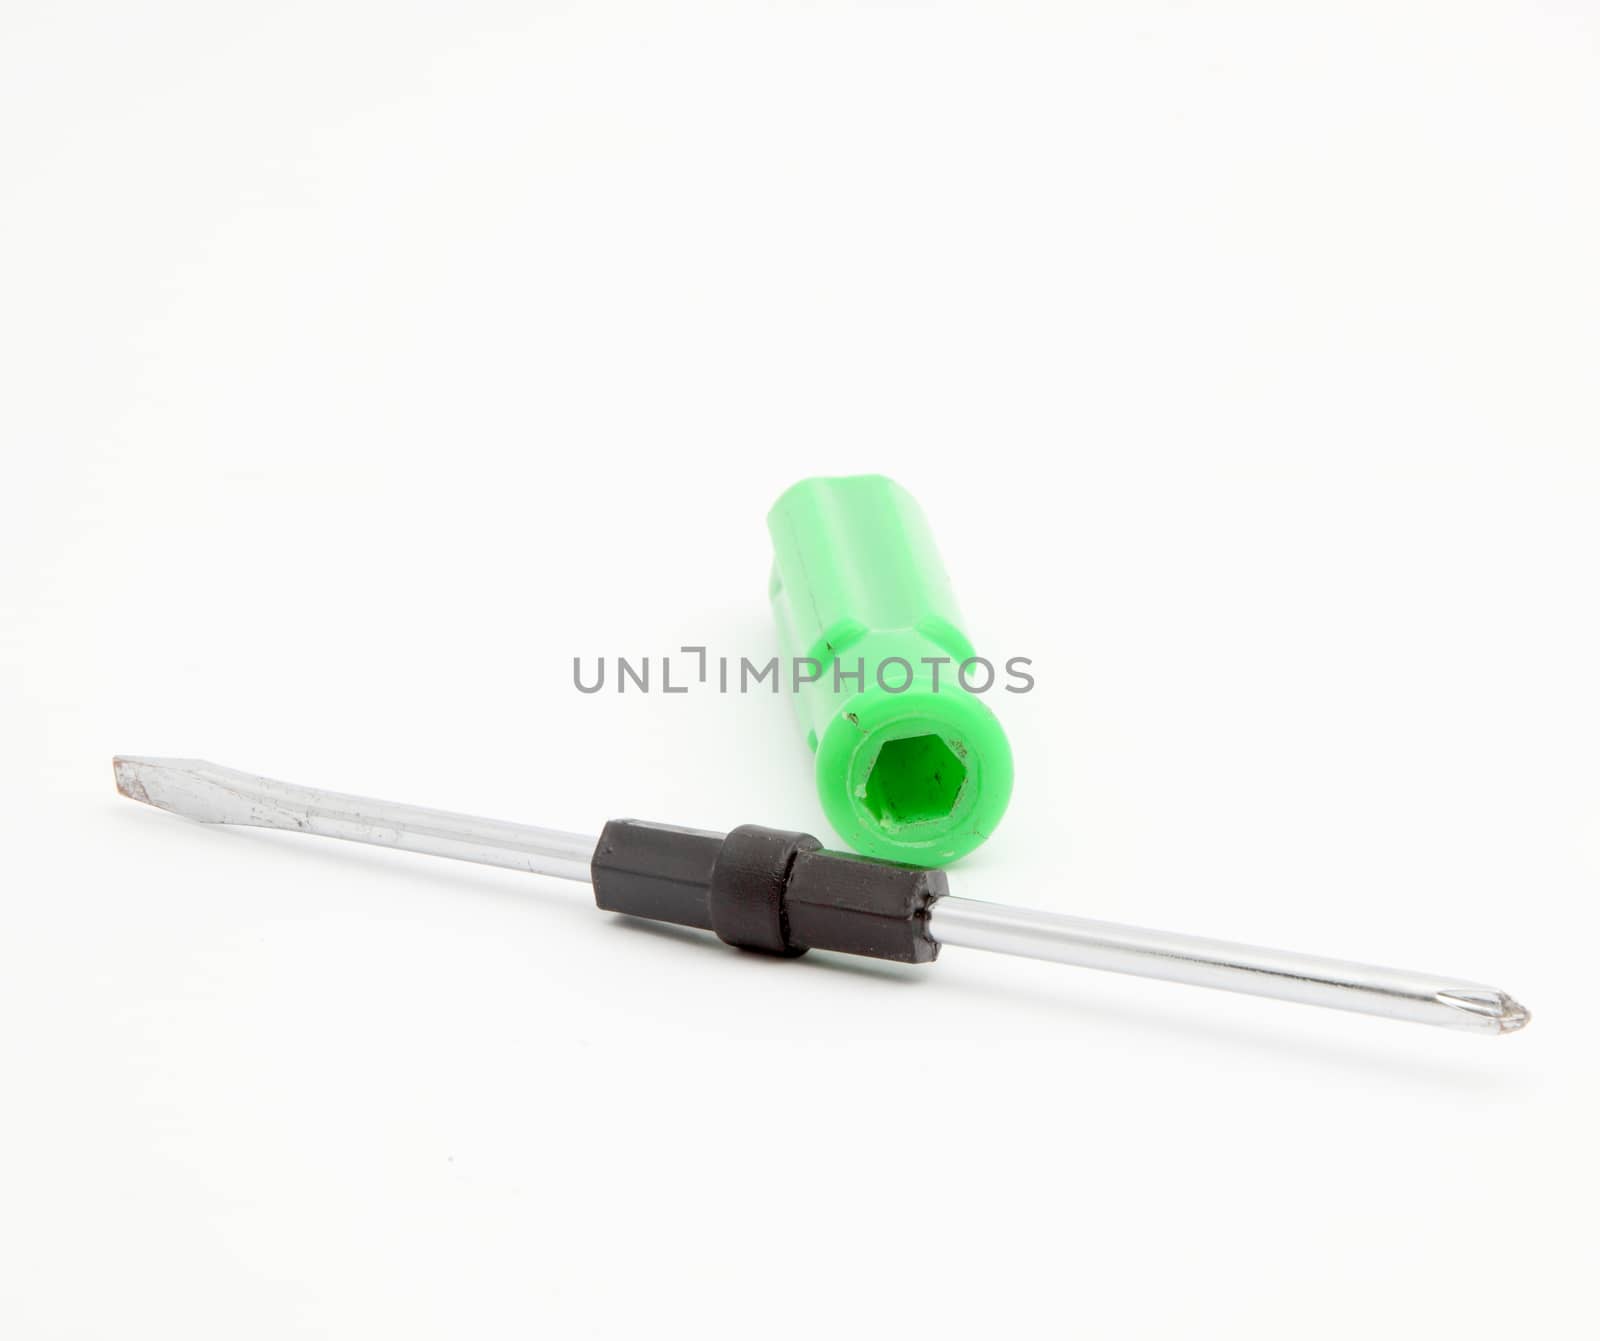  screwdriver isolated on white background